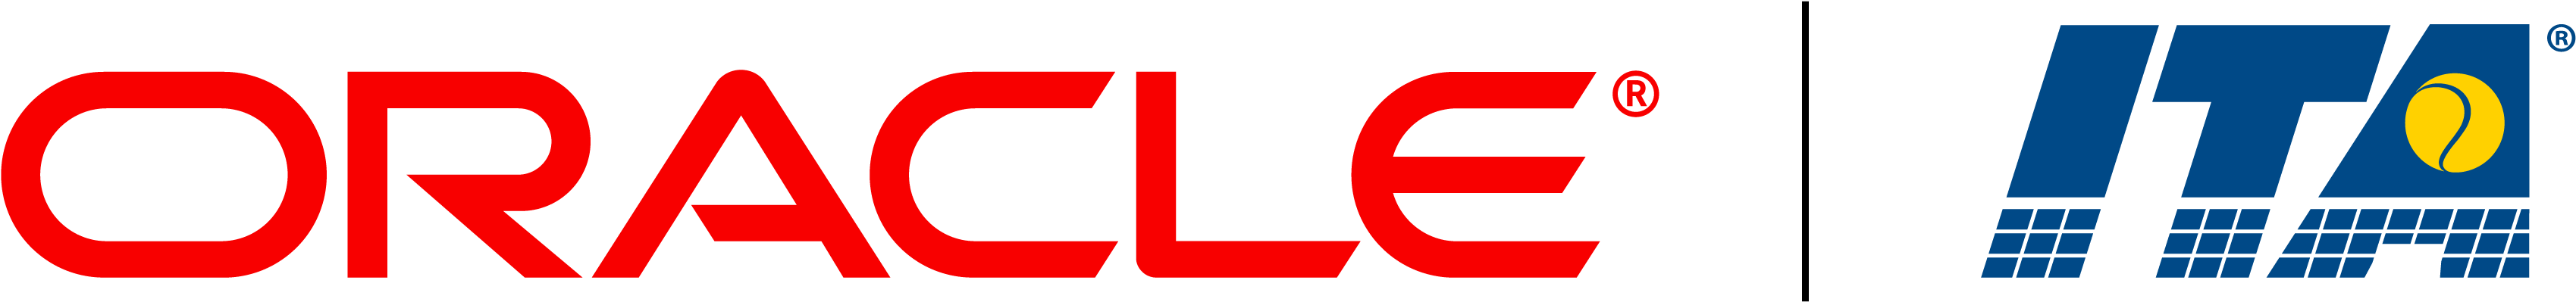 Ita Secures P, Nership With Oracle - Oracle Logo Translucent Background (3879x817), Png Download